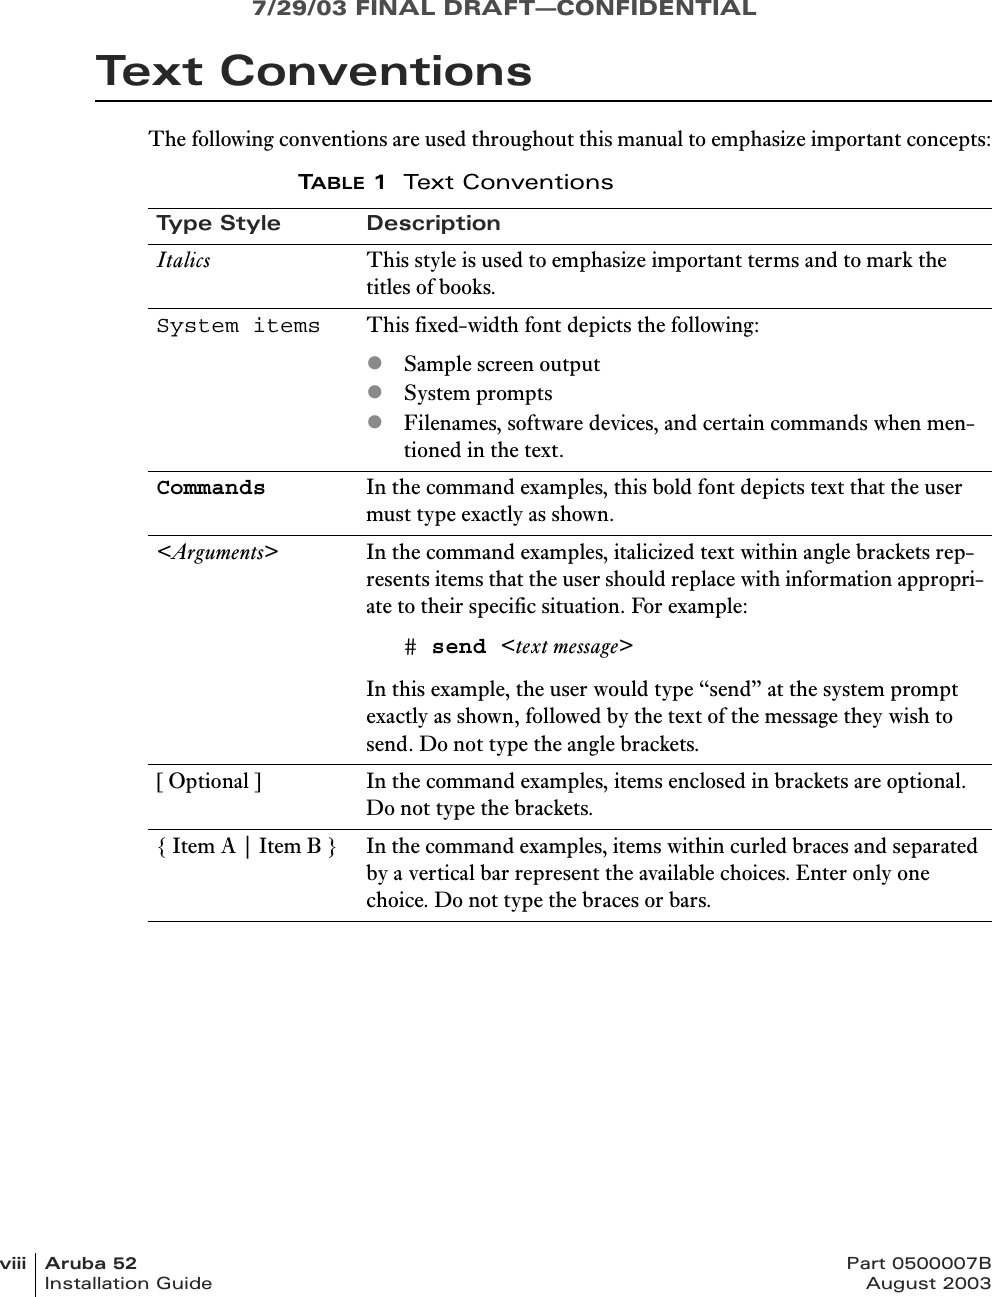 7/29/03 FINAL DRAFT—CONFIDENTIALviii Aruba 52 Part 0500007BInstallation Guide August 2003Text ConventionsThe following conventions are used throughout this manual to emphasize important concepts:TABLE 1Text ConventionsType Style DescriptionItalics This style is used to emphasize important terms and to mark the titles of books.System items This fixed-width font depicts the following:zSample screen outputzSystem promptszFilenames, software devices, and certain commands when men-tioned in the text.Commands In the command examples, this bold font depicts text that the user must type exactly as shown.&lt;Arguments&gt; In the command examples, italicized text within angle brackets rep-resents items that the user should replace with information appropri-ate to their specific situation. For example:# send &lt;text message&gt;In this example, the user would type “send” at the system prompt exactly as shown, followed by the text of the message they wish to send. Do not type the angle brackets.[ Optional ] In the command examples, items enclosed in brackets are optional. Do not type the brackets.{ Item A | Item B } In the command examples, items within curled braces and separated by a vertical bar represent the available choices. Enter only one choice. Do not type the braces or bars.